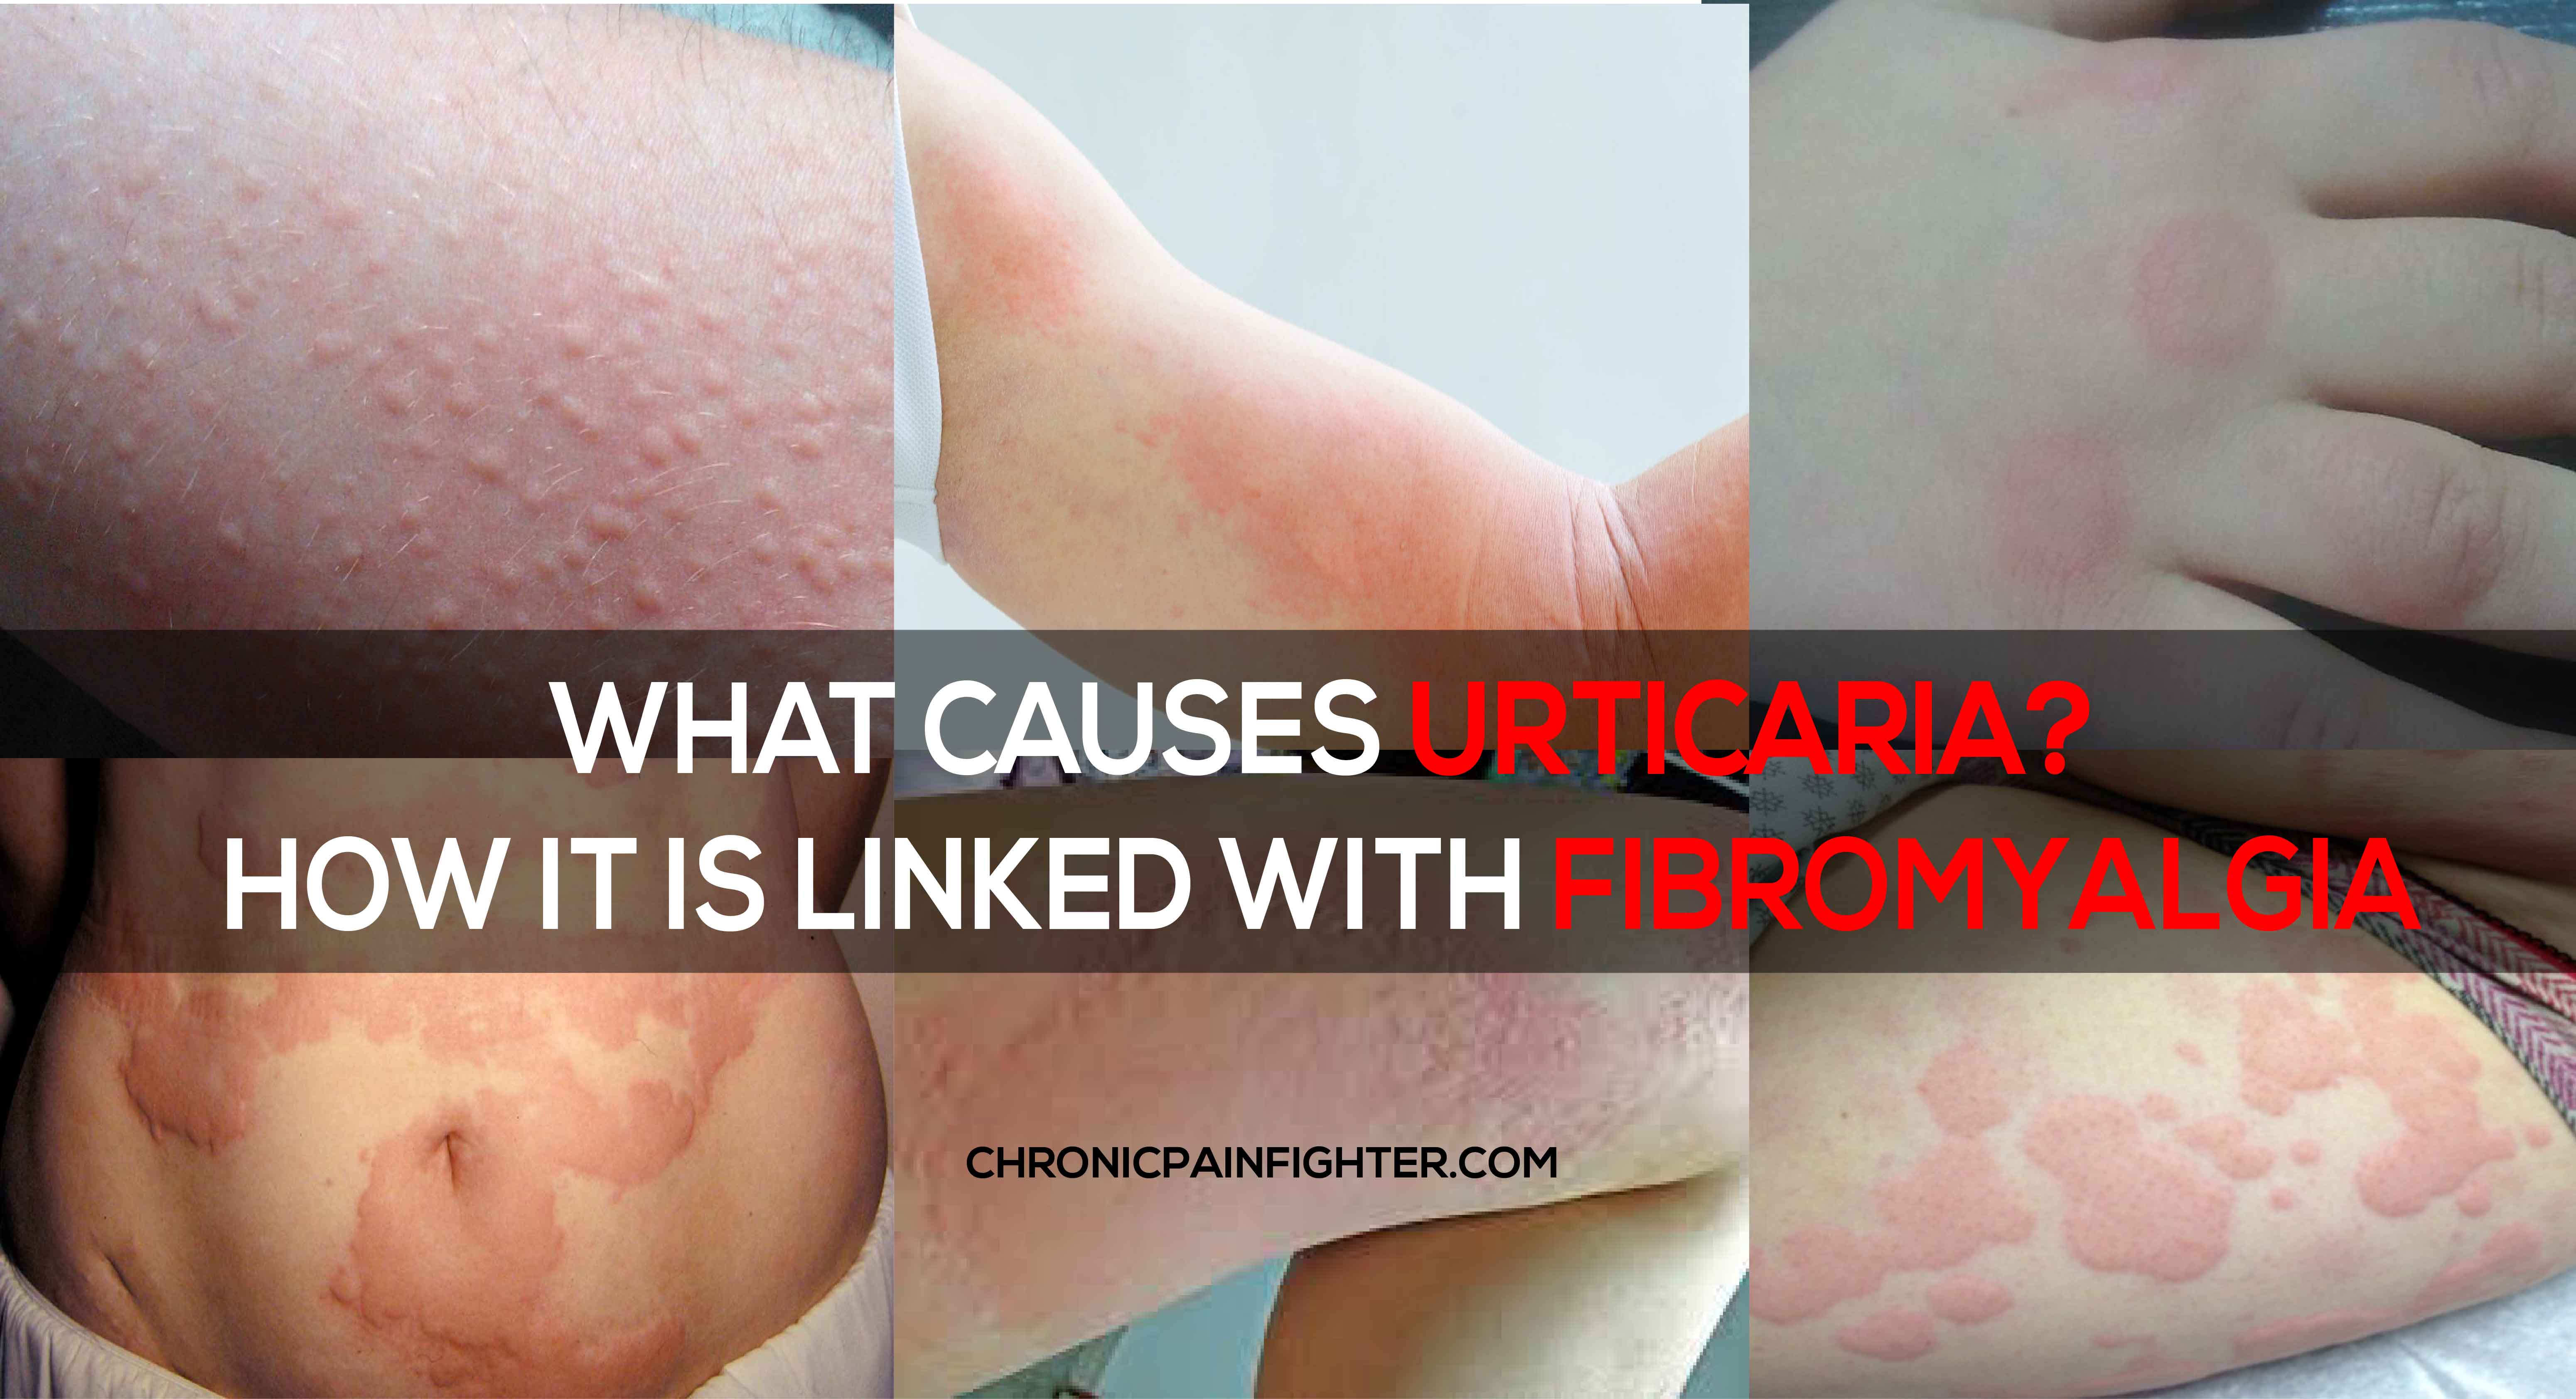 What Causes Urticaria? How It is Linked With Fibromyalgia